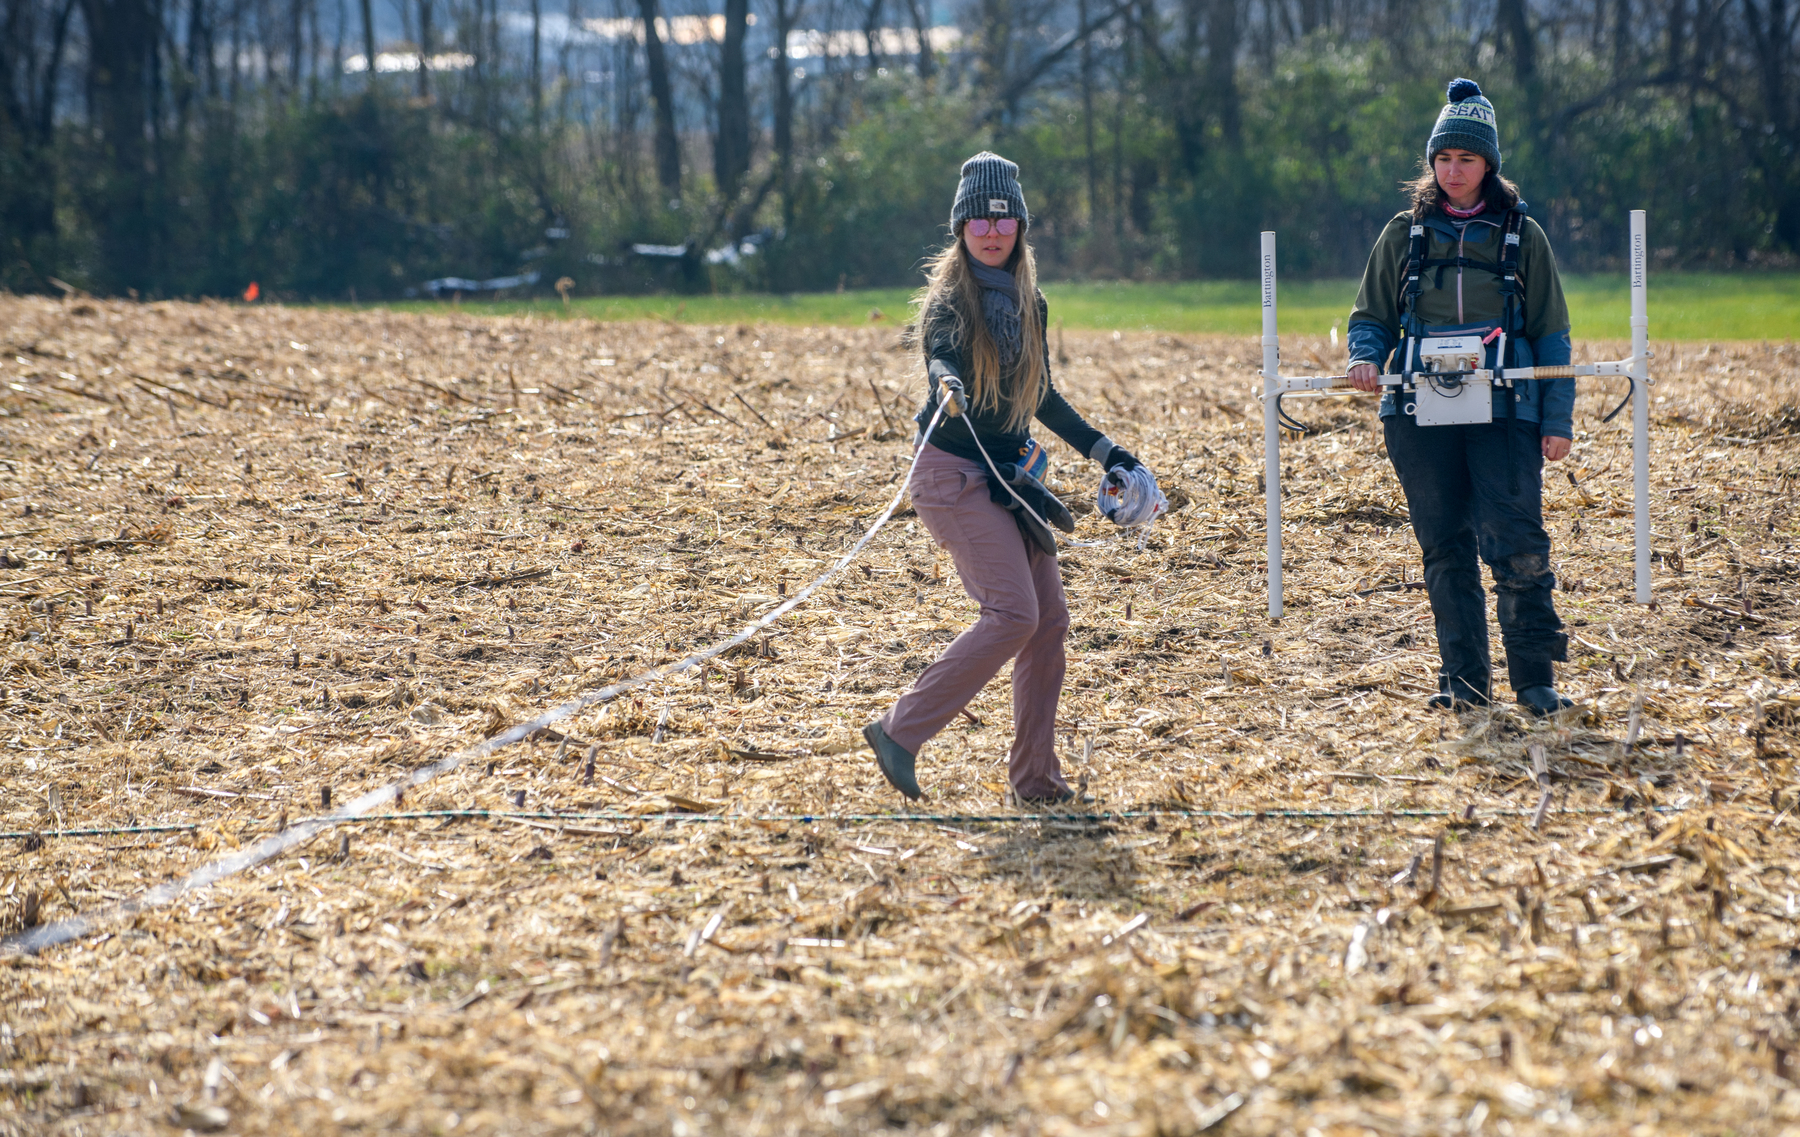 Dr. Dana Bardolph, left, of Northern Illinois University and Archaeologist Marie Meizis, right, of the Illinois State Archaeological Survey conducting gradiometer survey (courtesy Matt Dayhoff, Peoria Journal Star)